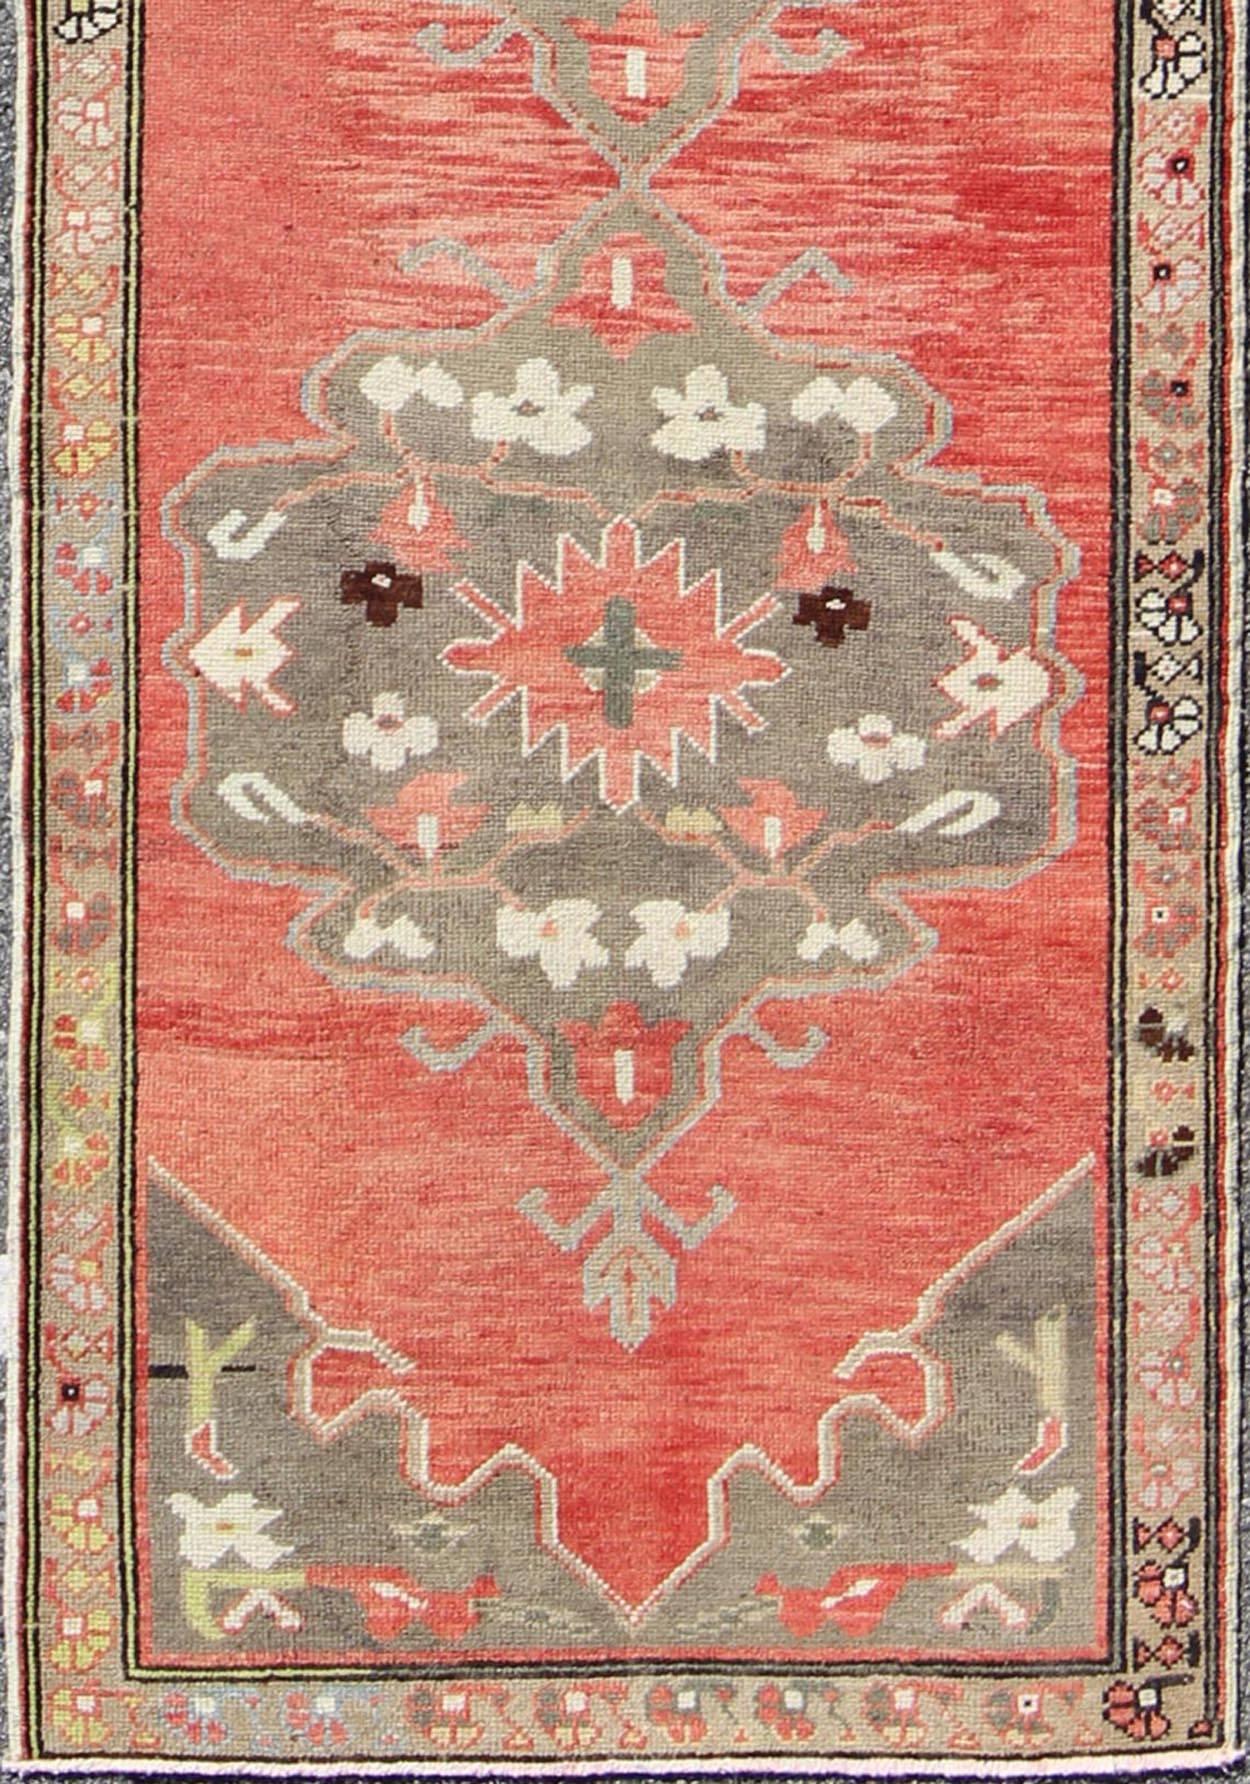 Three Medallion vintage Turkish Oushak runner in red, charcoal, and grey, rug tu-ugu-95168, country of origin / type: Turkey / Oushak, circa 1940.

This beautiful vintage Oushak runner from 1940s Turkey features a Classic Oushak design, which is